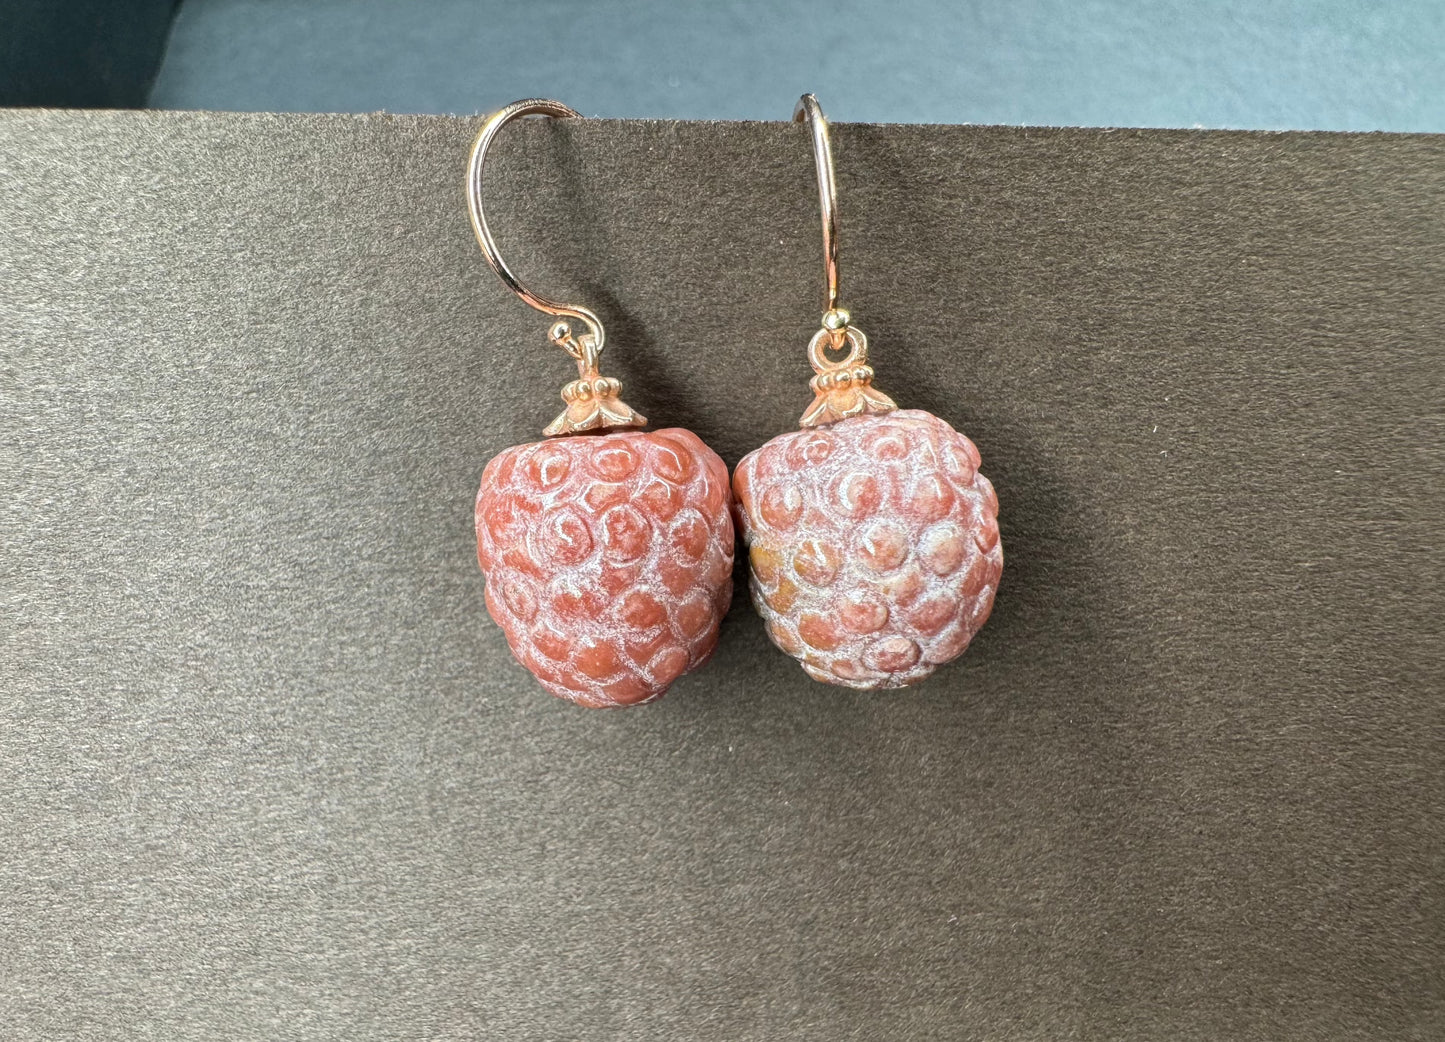 14k Rose Gold Earrings with Ruby Curved Raspberries